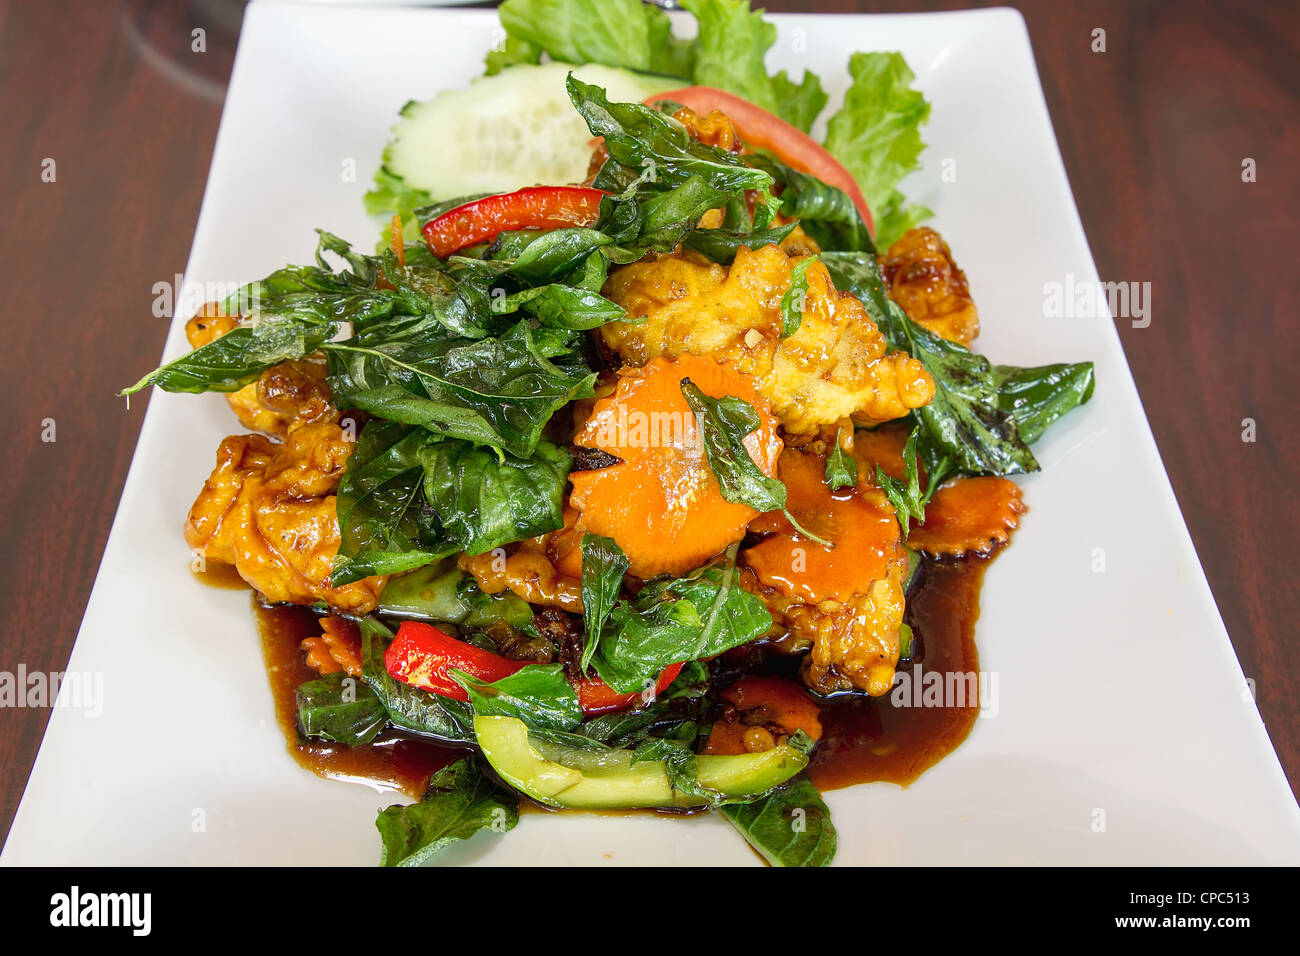 Thai Crispy Fried Chicken with Basil Leaves Bell Pepper Cucumber Tomato Dish Vertical Stock Photo